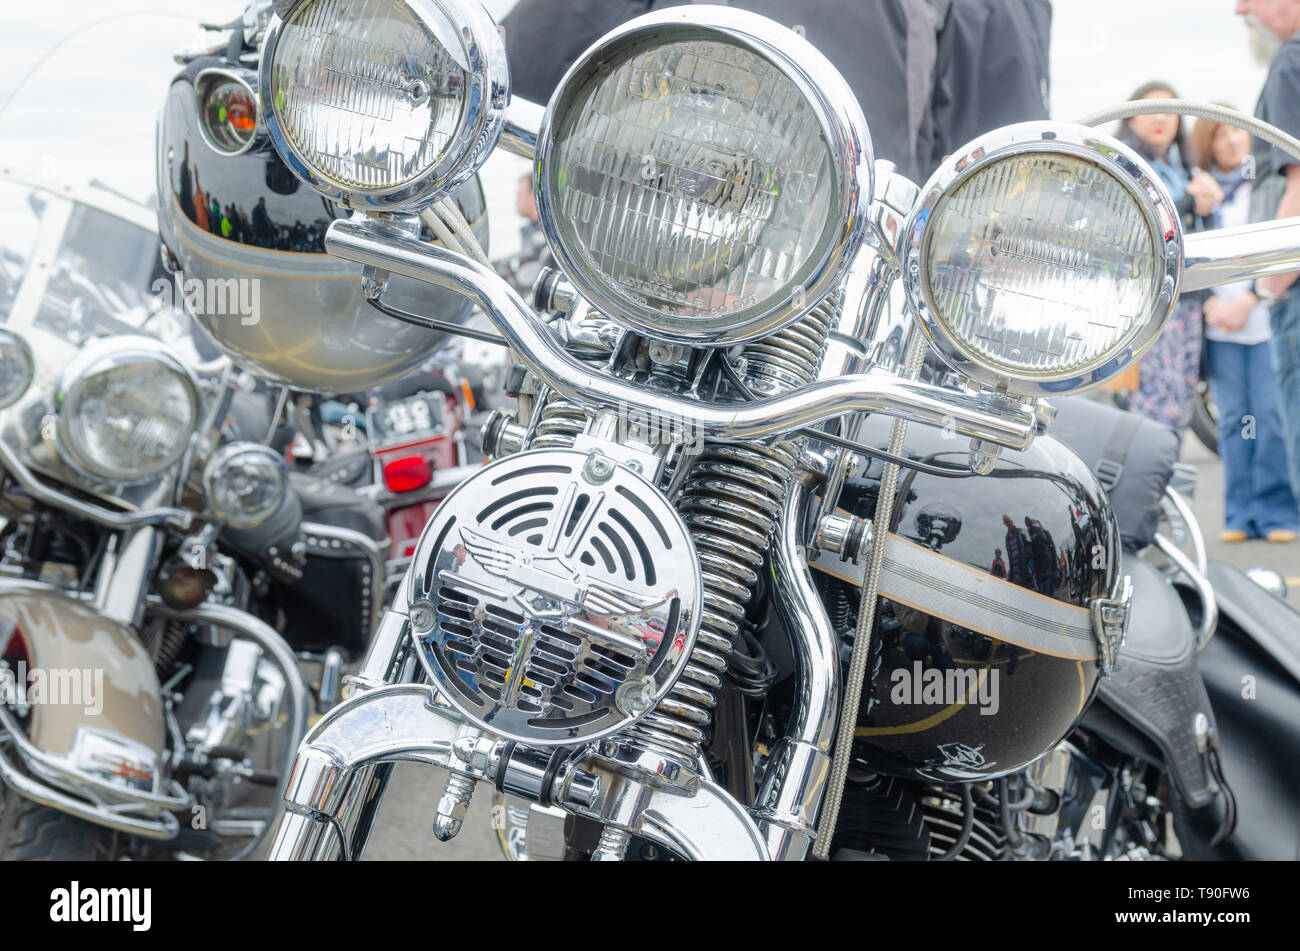 Illustrative Editorial: A set of highly polished chrome handle bars, light stack and coiled suspension springs on a parked Harley Davidson motorcycle. Stock Photo